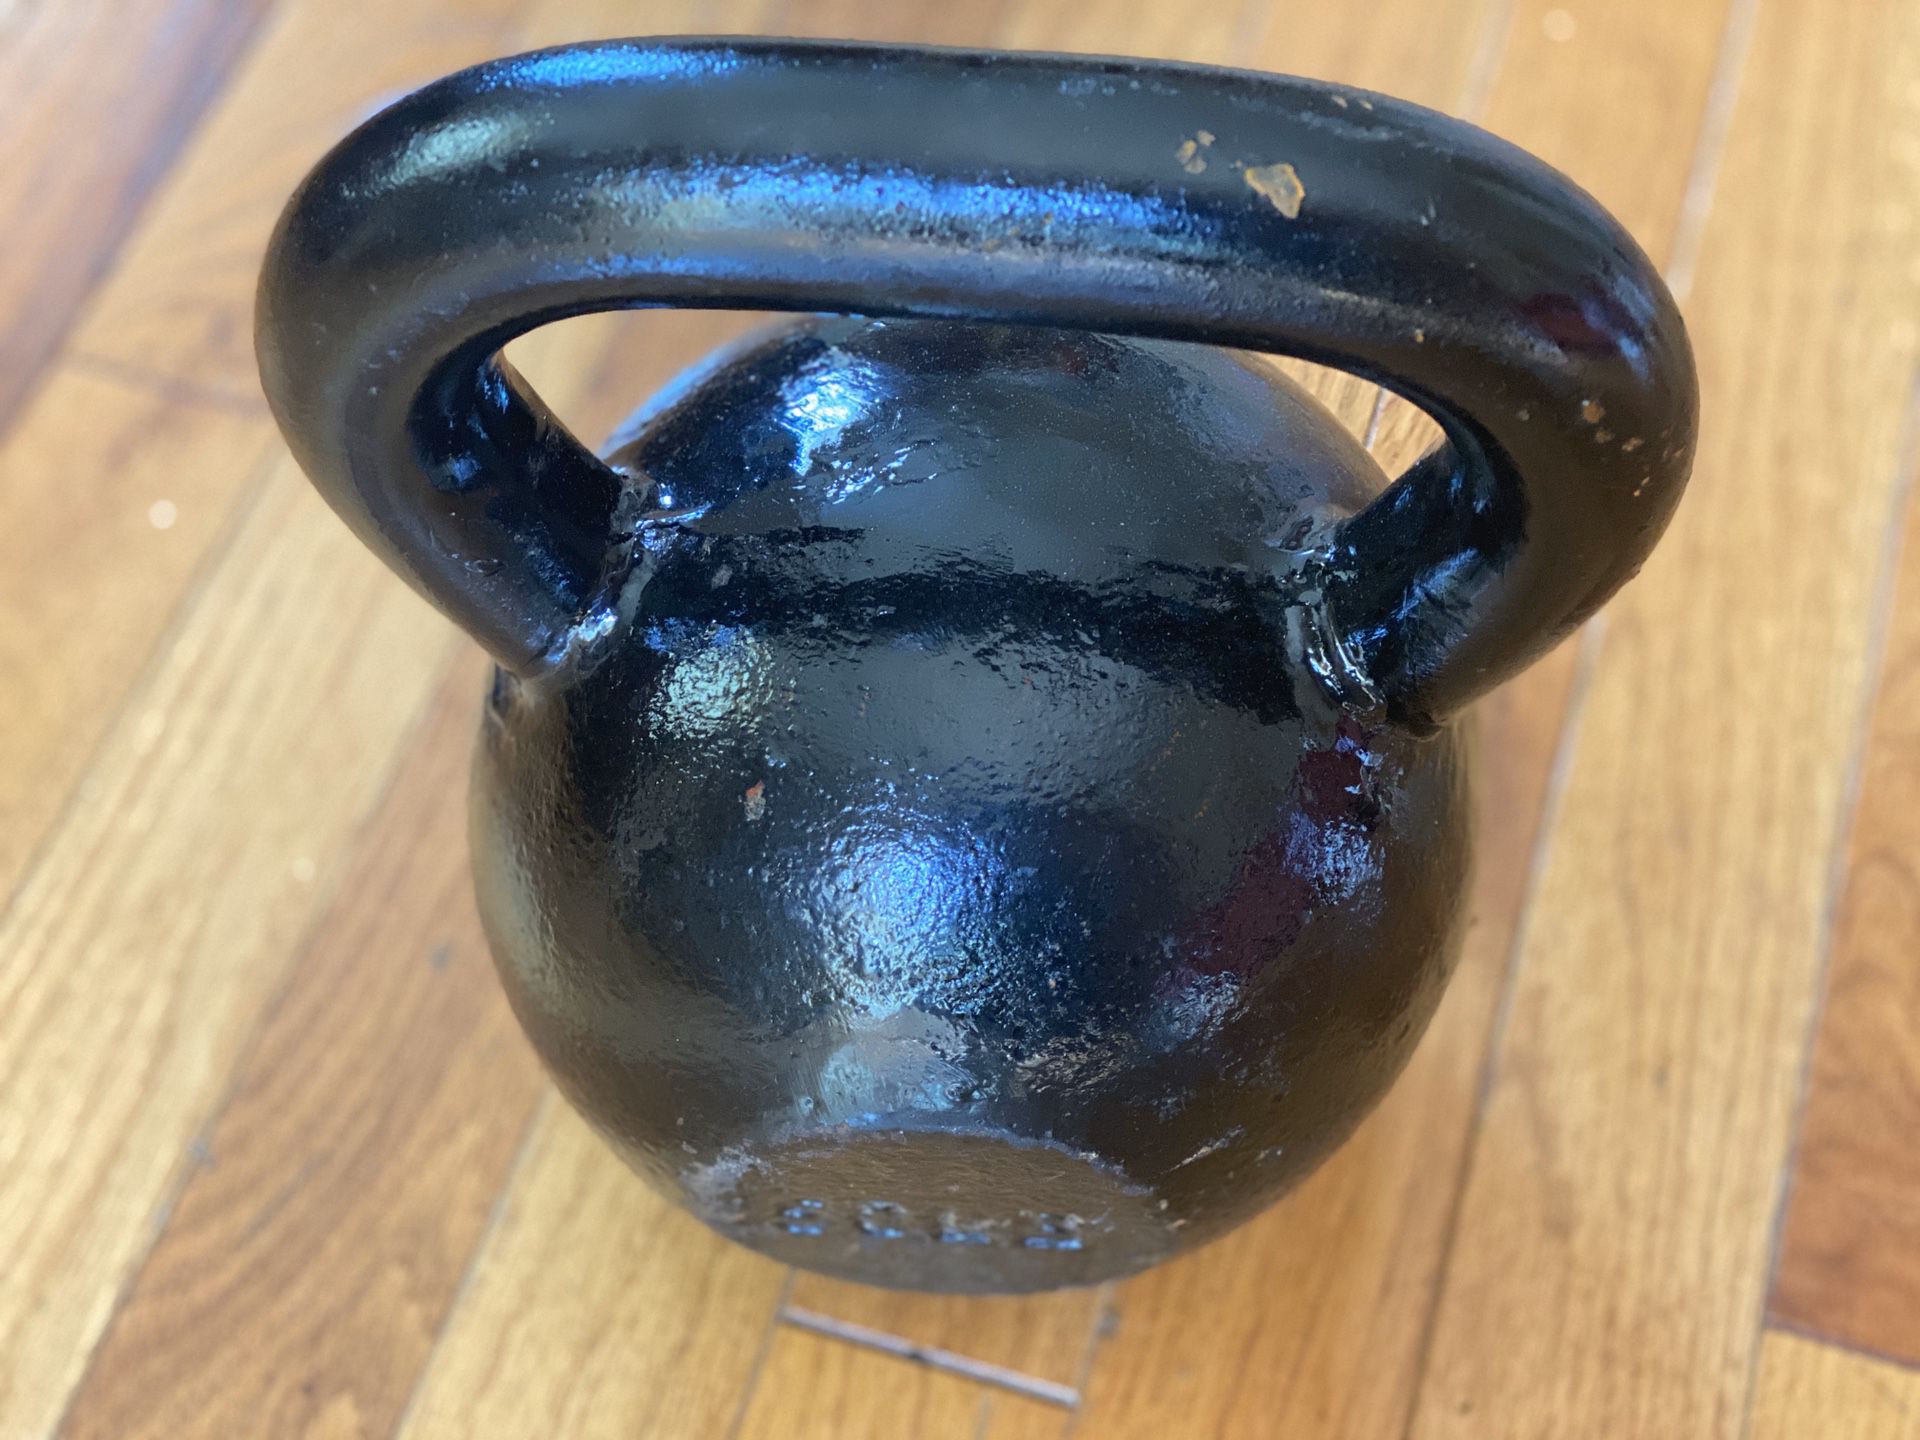 Rogue Kettlebell 50 Lb Give me an offer an you can take it today